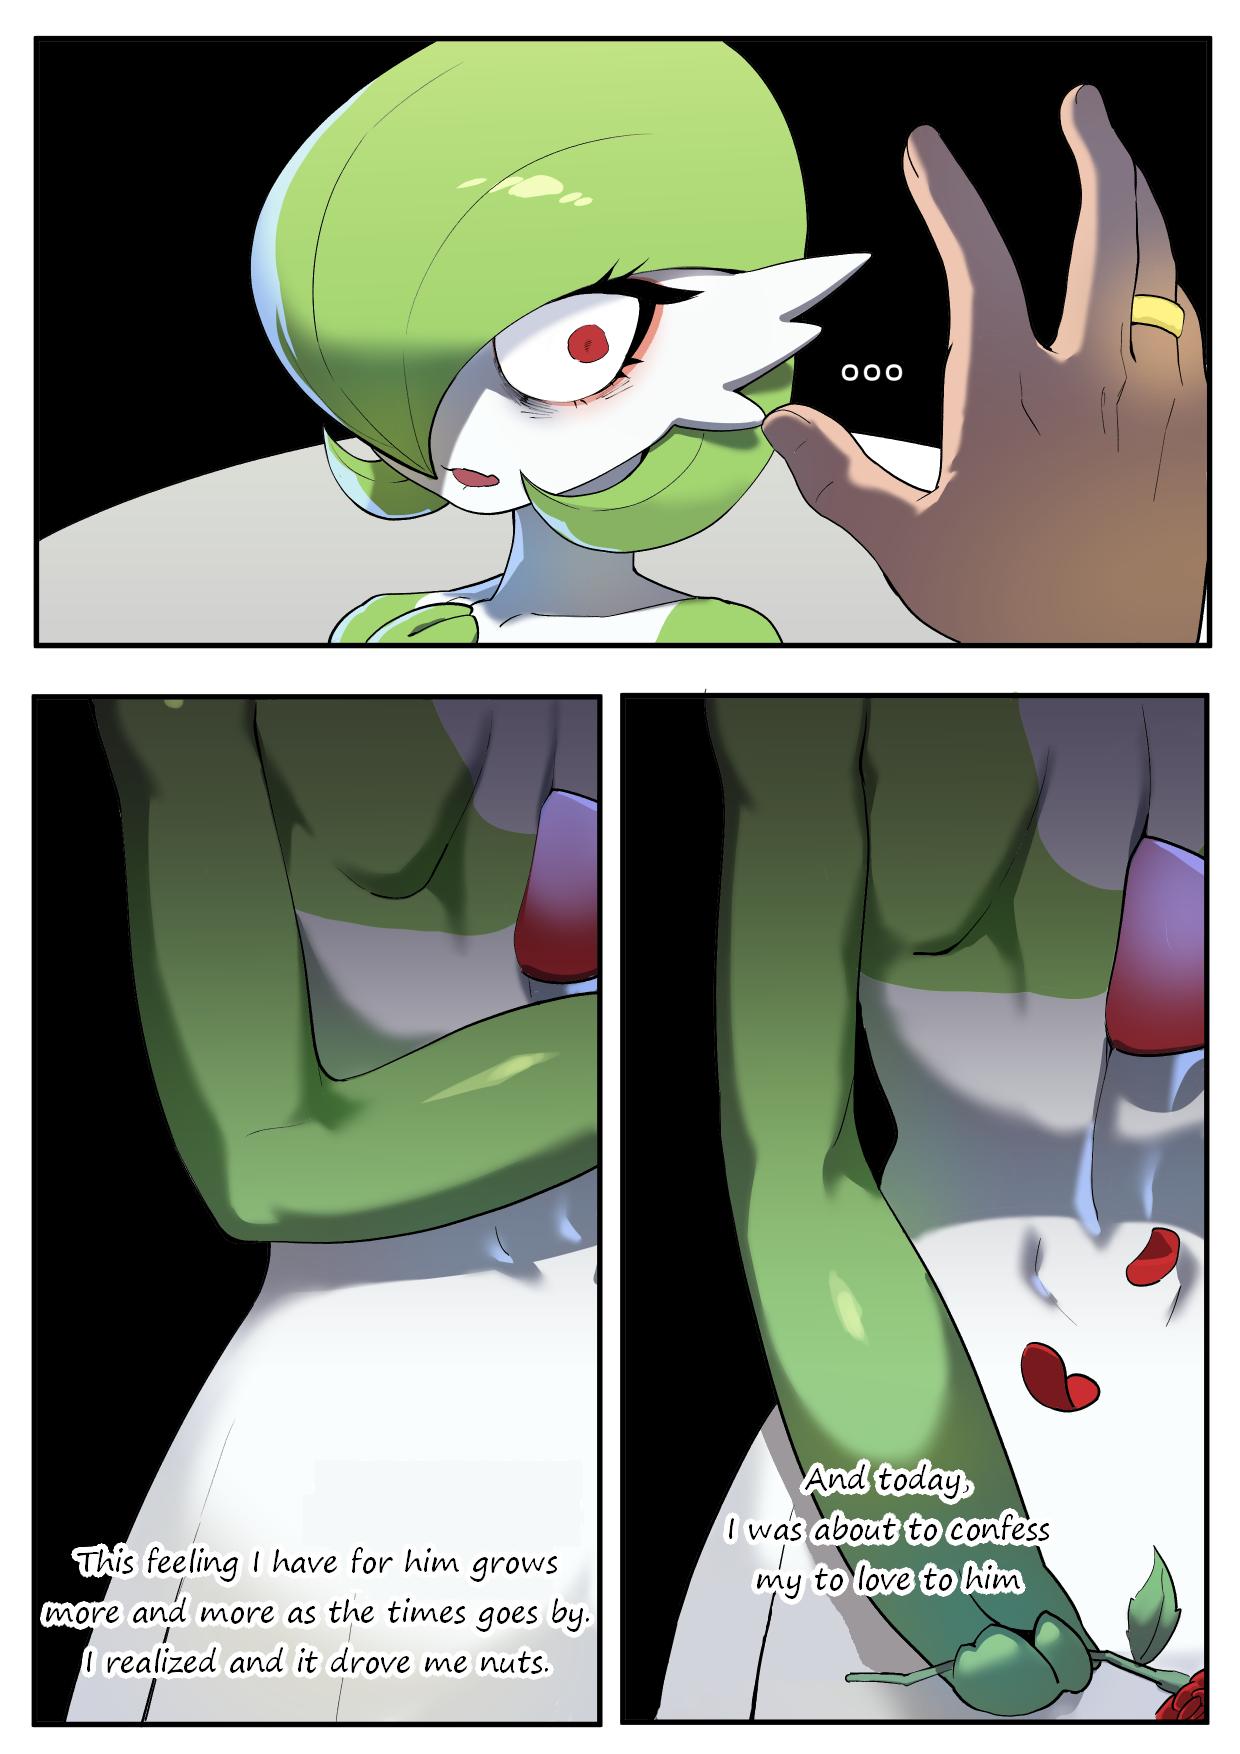 Fantasy The Gardevior that loved her trainer too much - Pokemon | pocket monsters Bdsm - Page 2